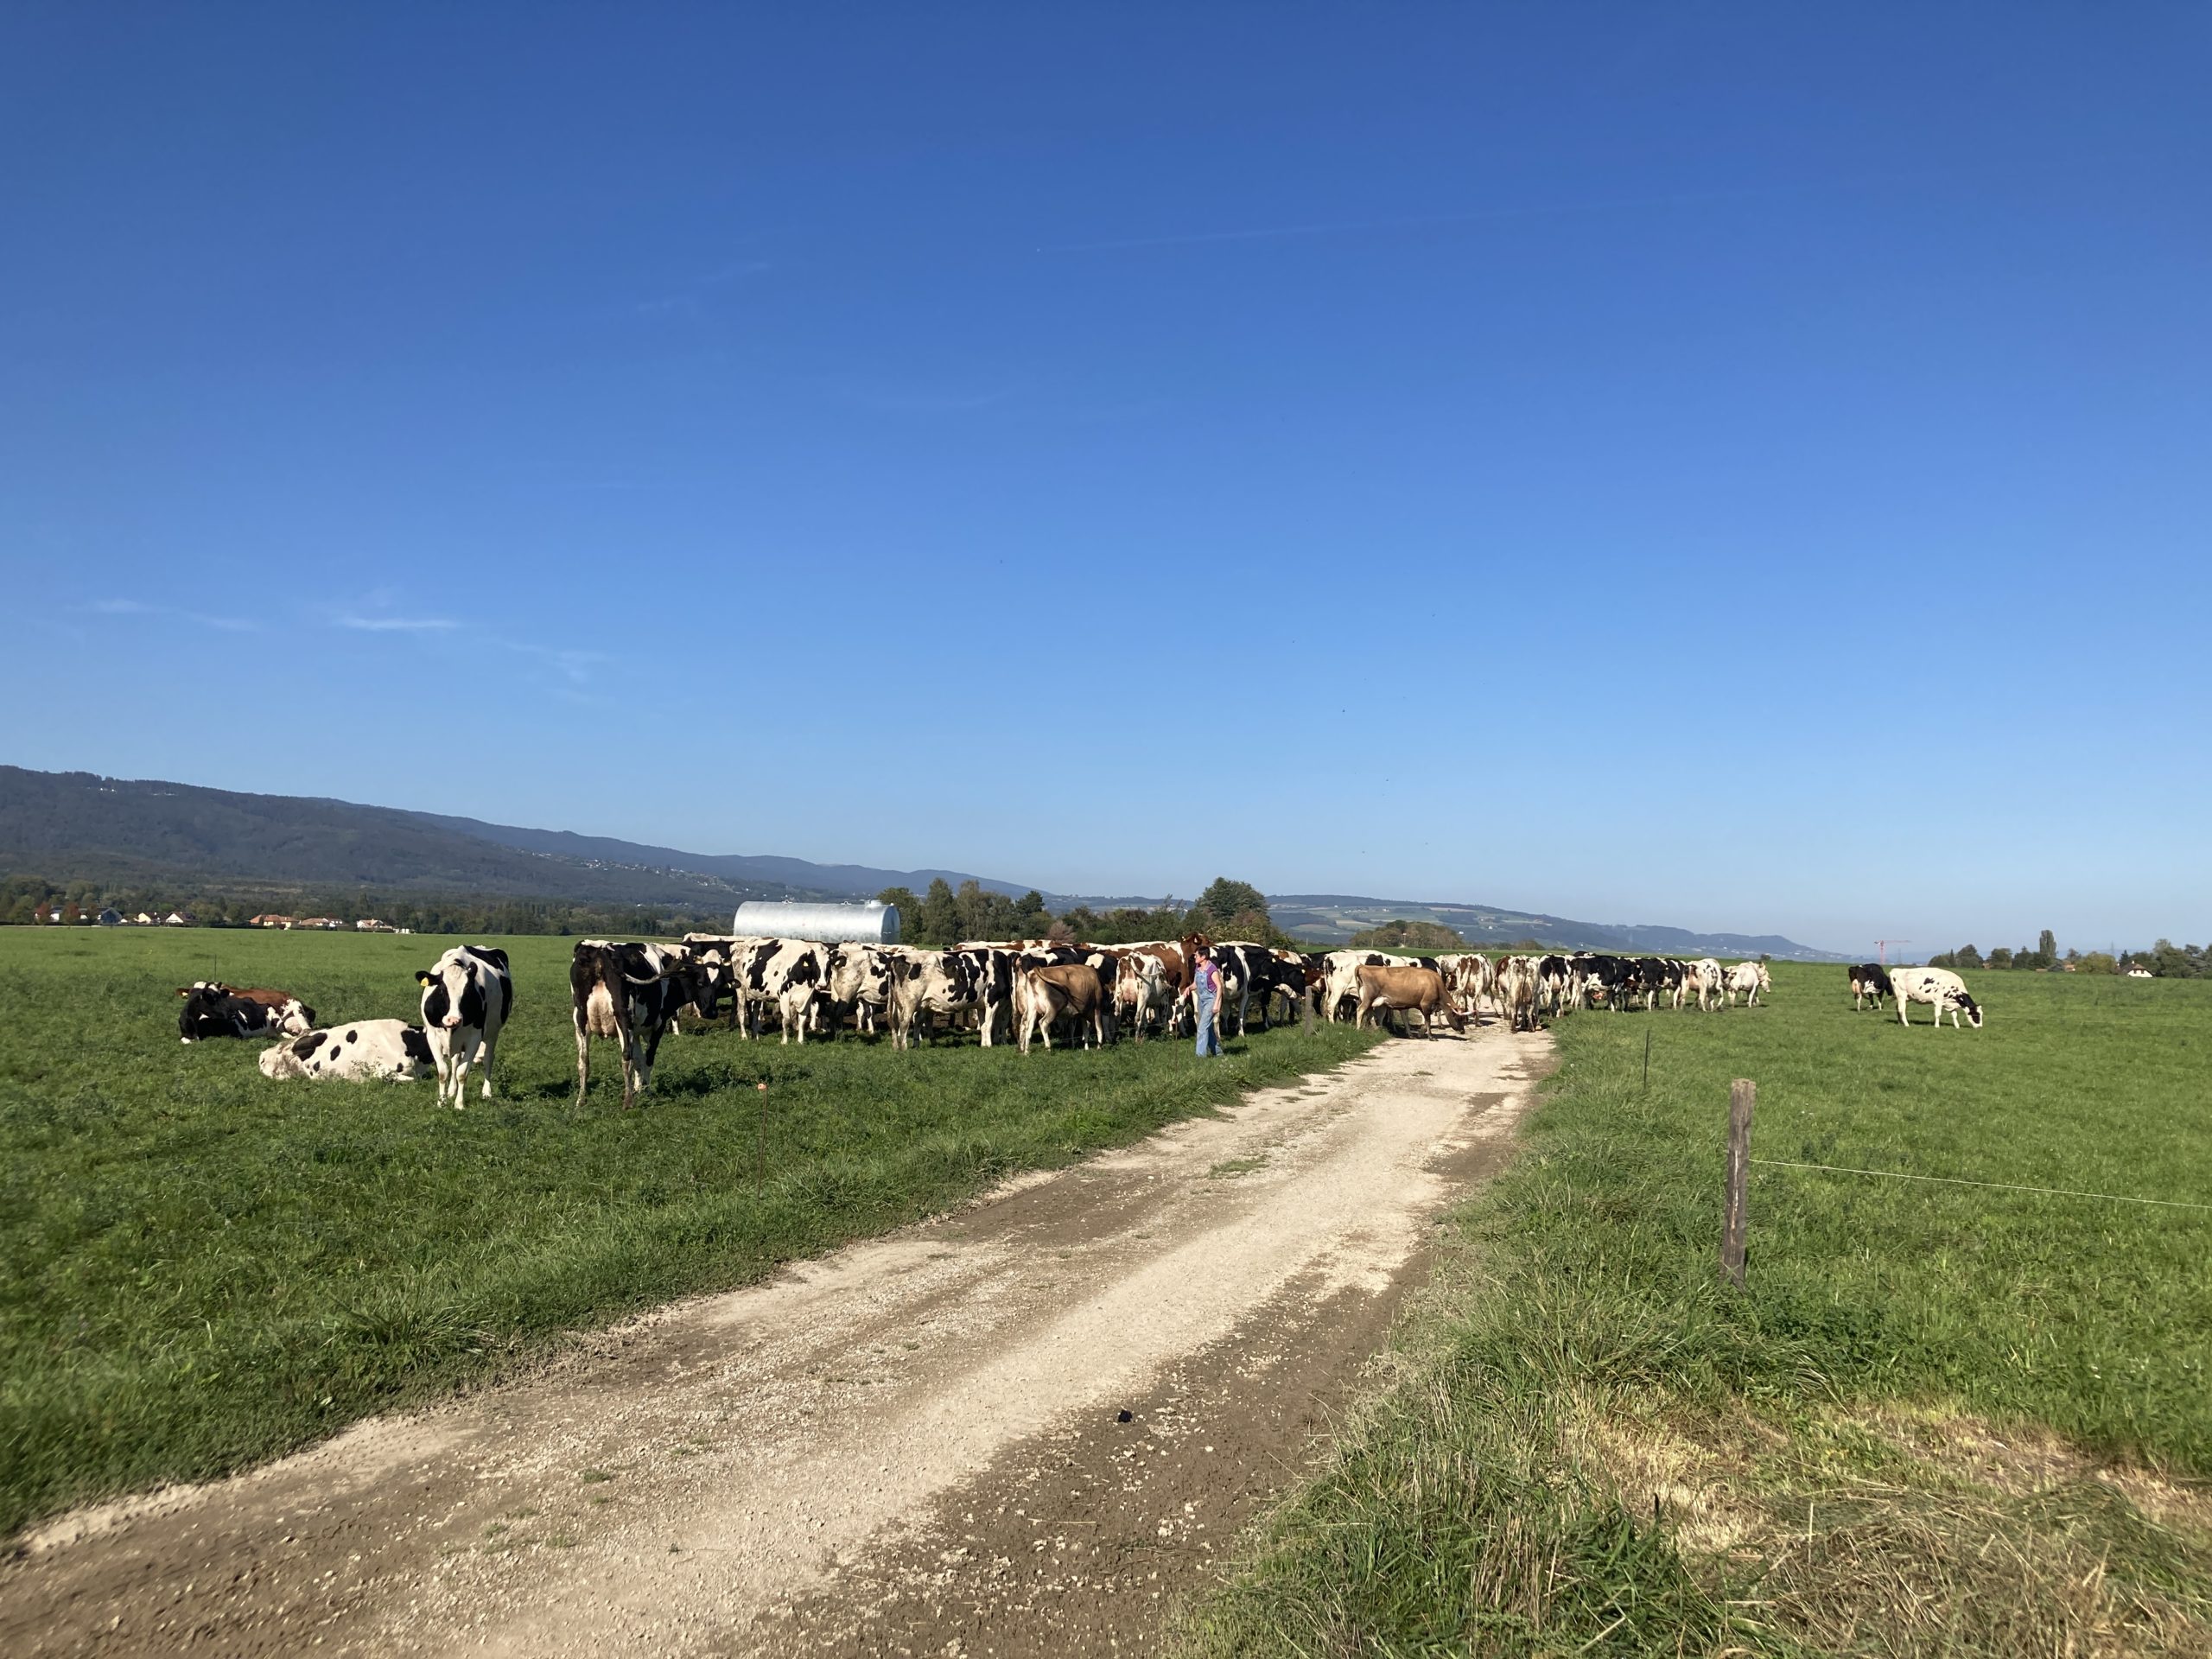 A Walk During Cow Rush Hour